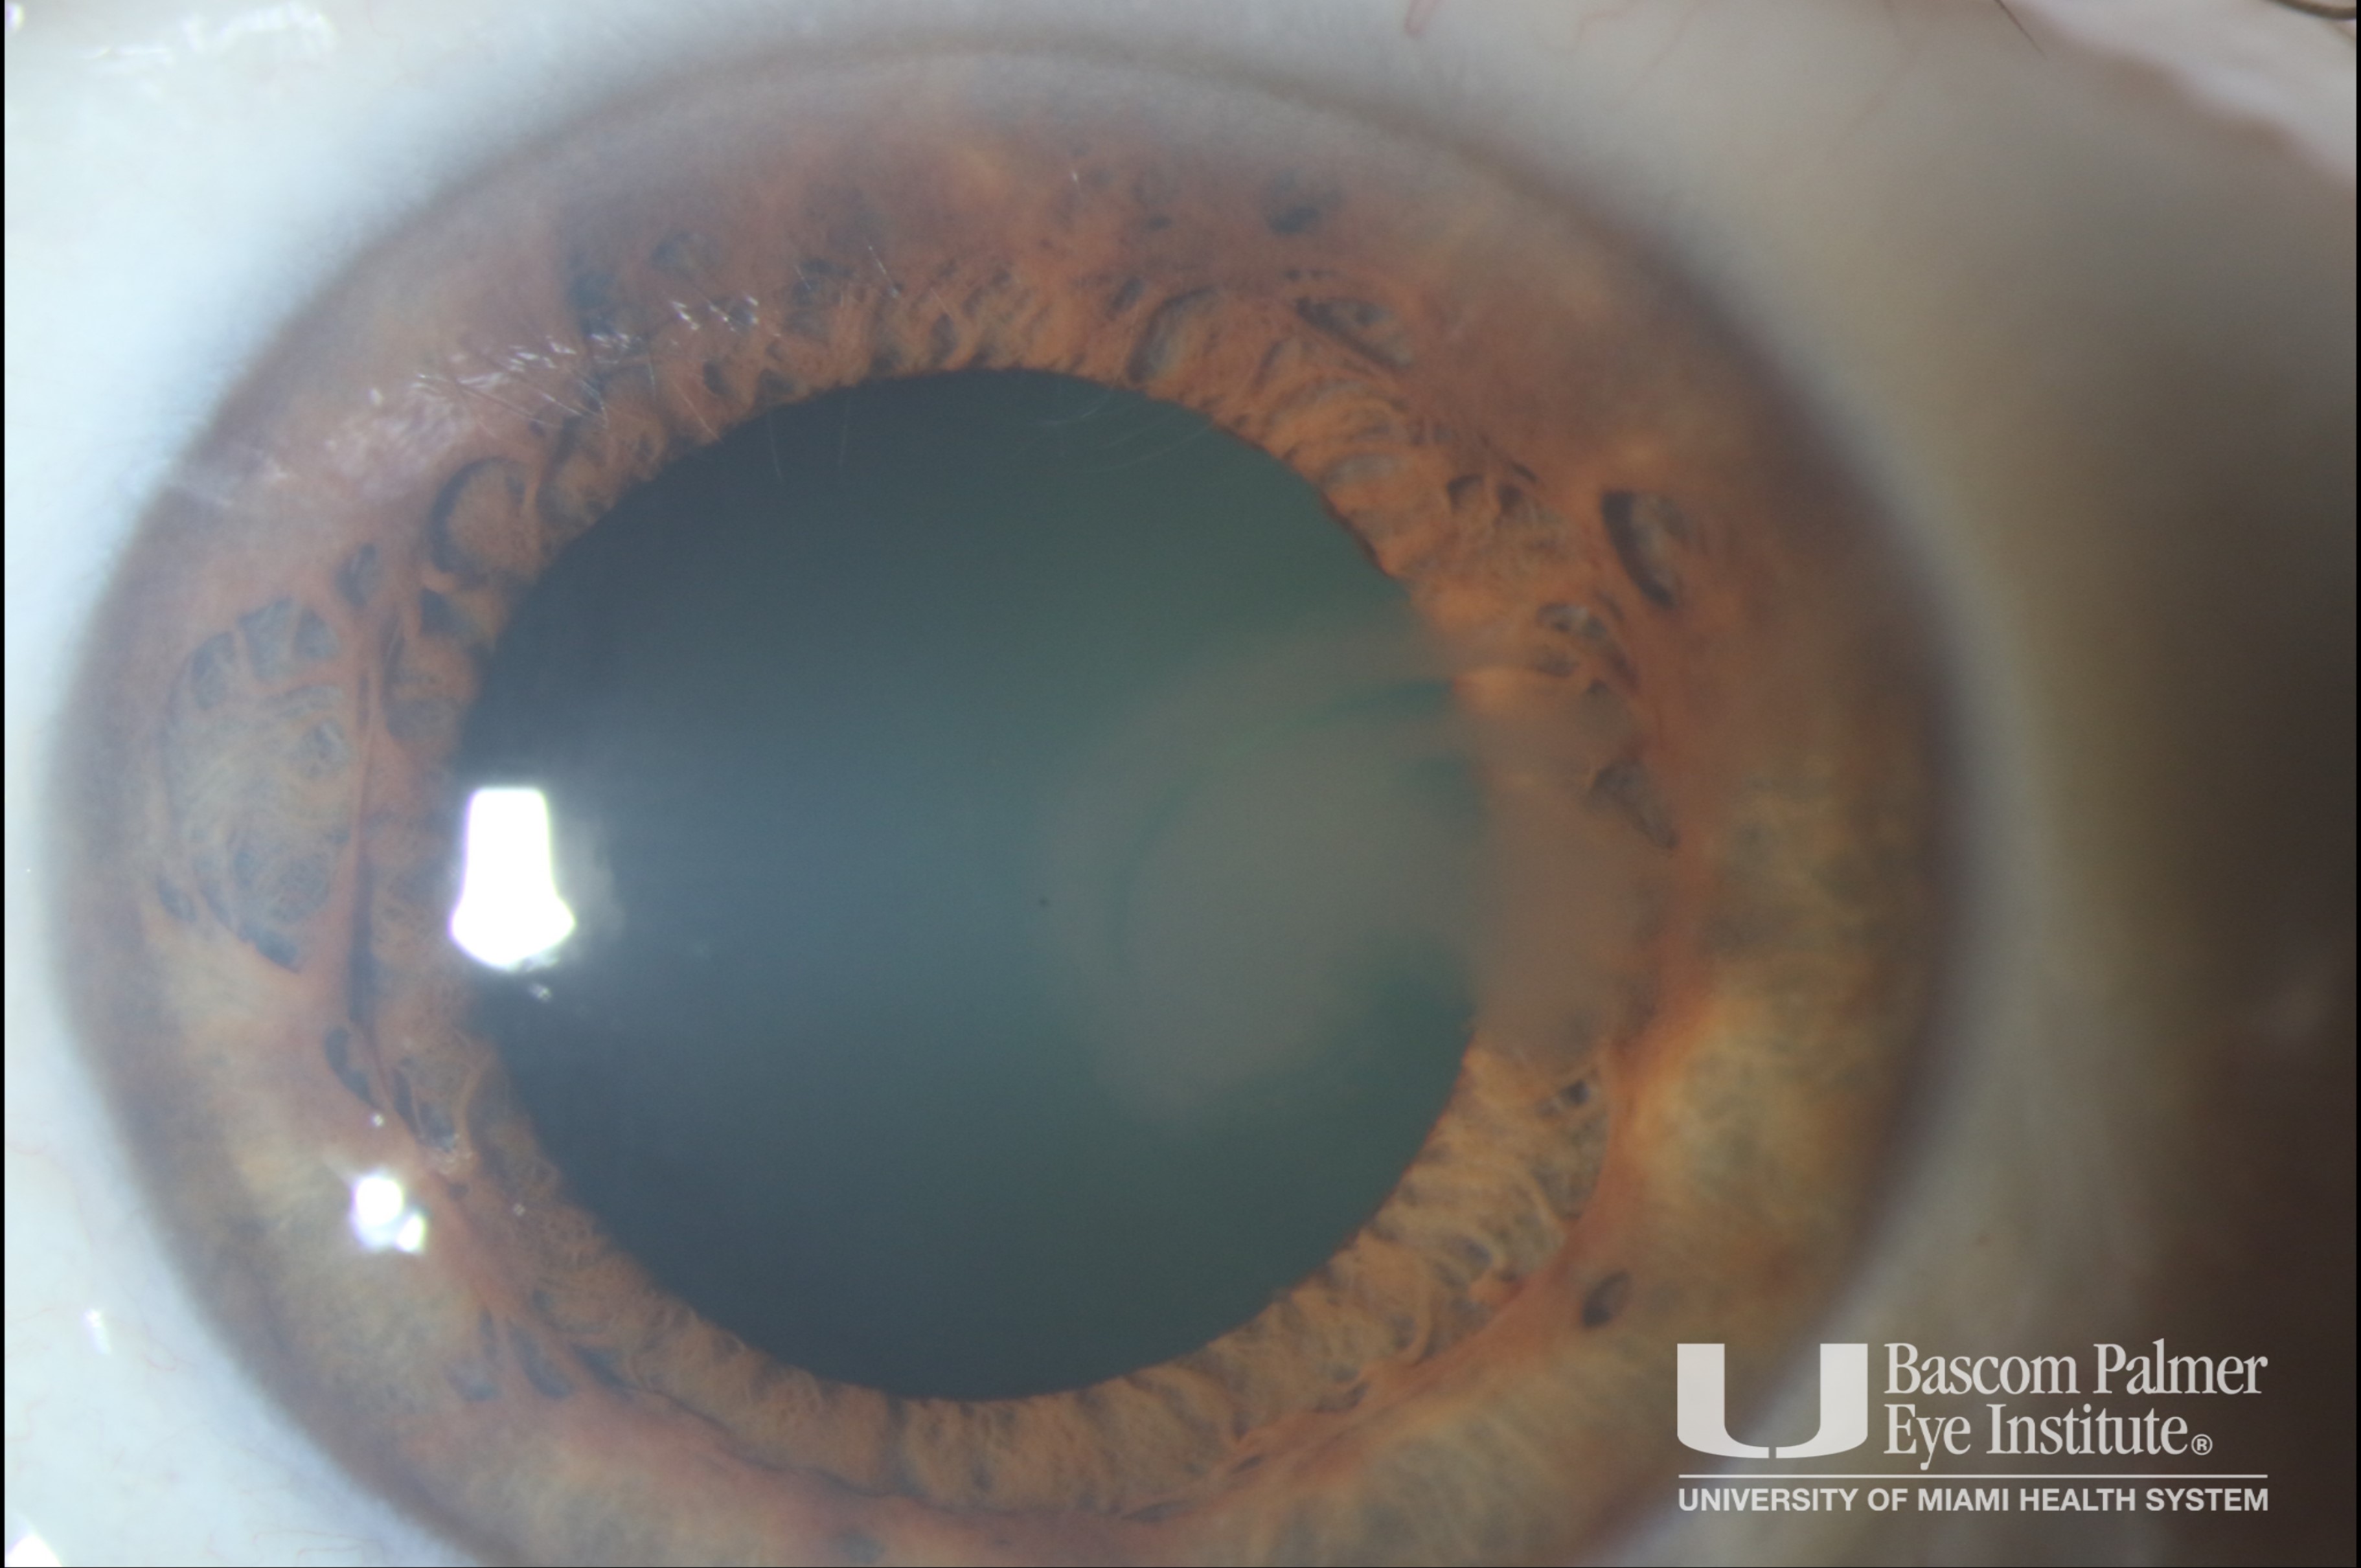 Slit lamp photo of biopsy proven Lisch Corneal dystrophy.